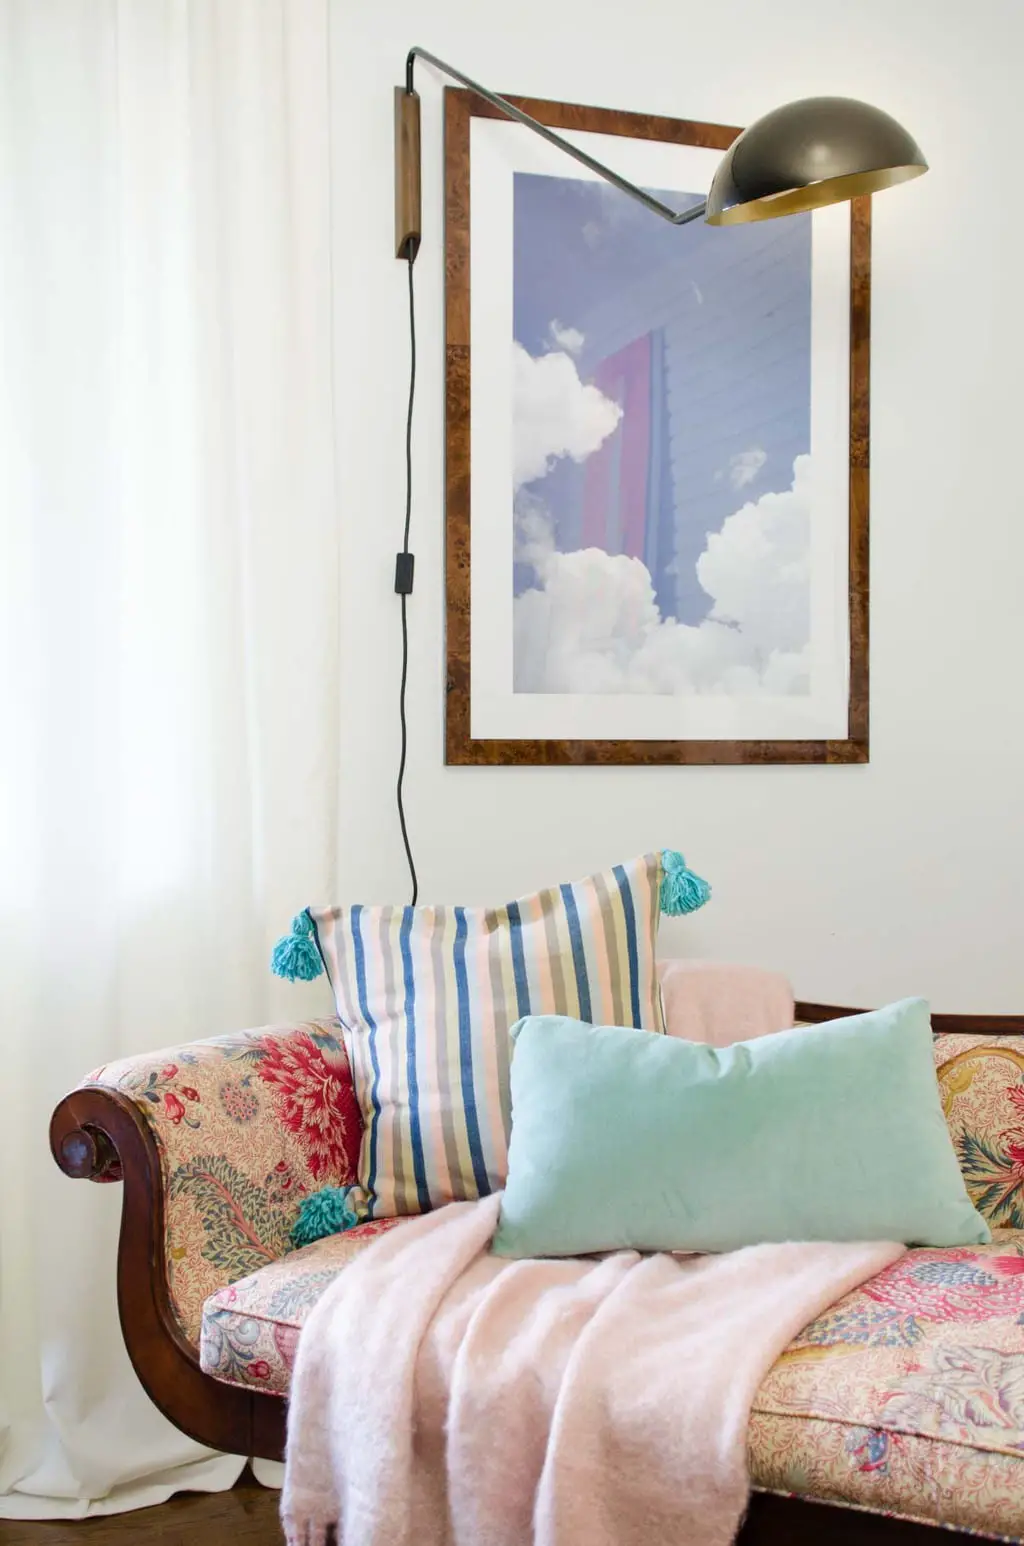 @thouswellblog's living room makeover, mixing traditional and modern design elements